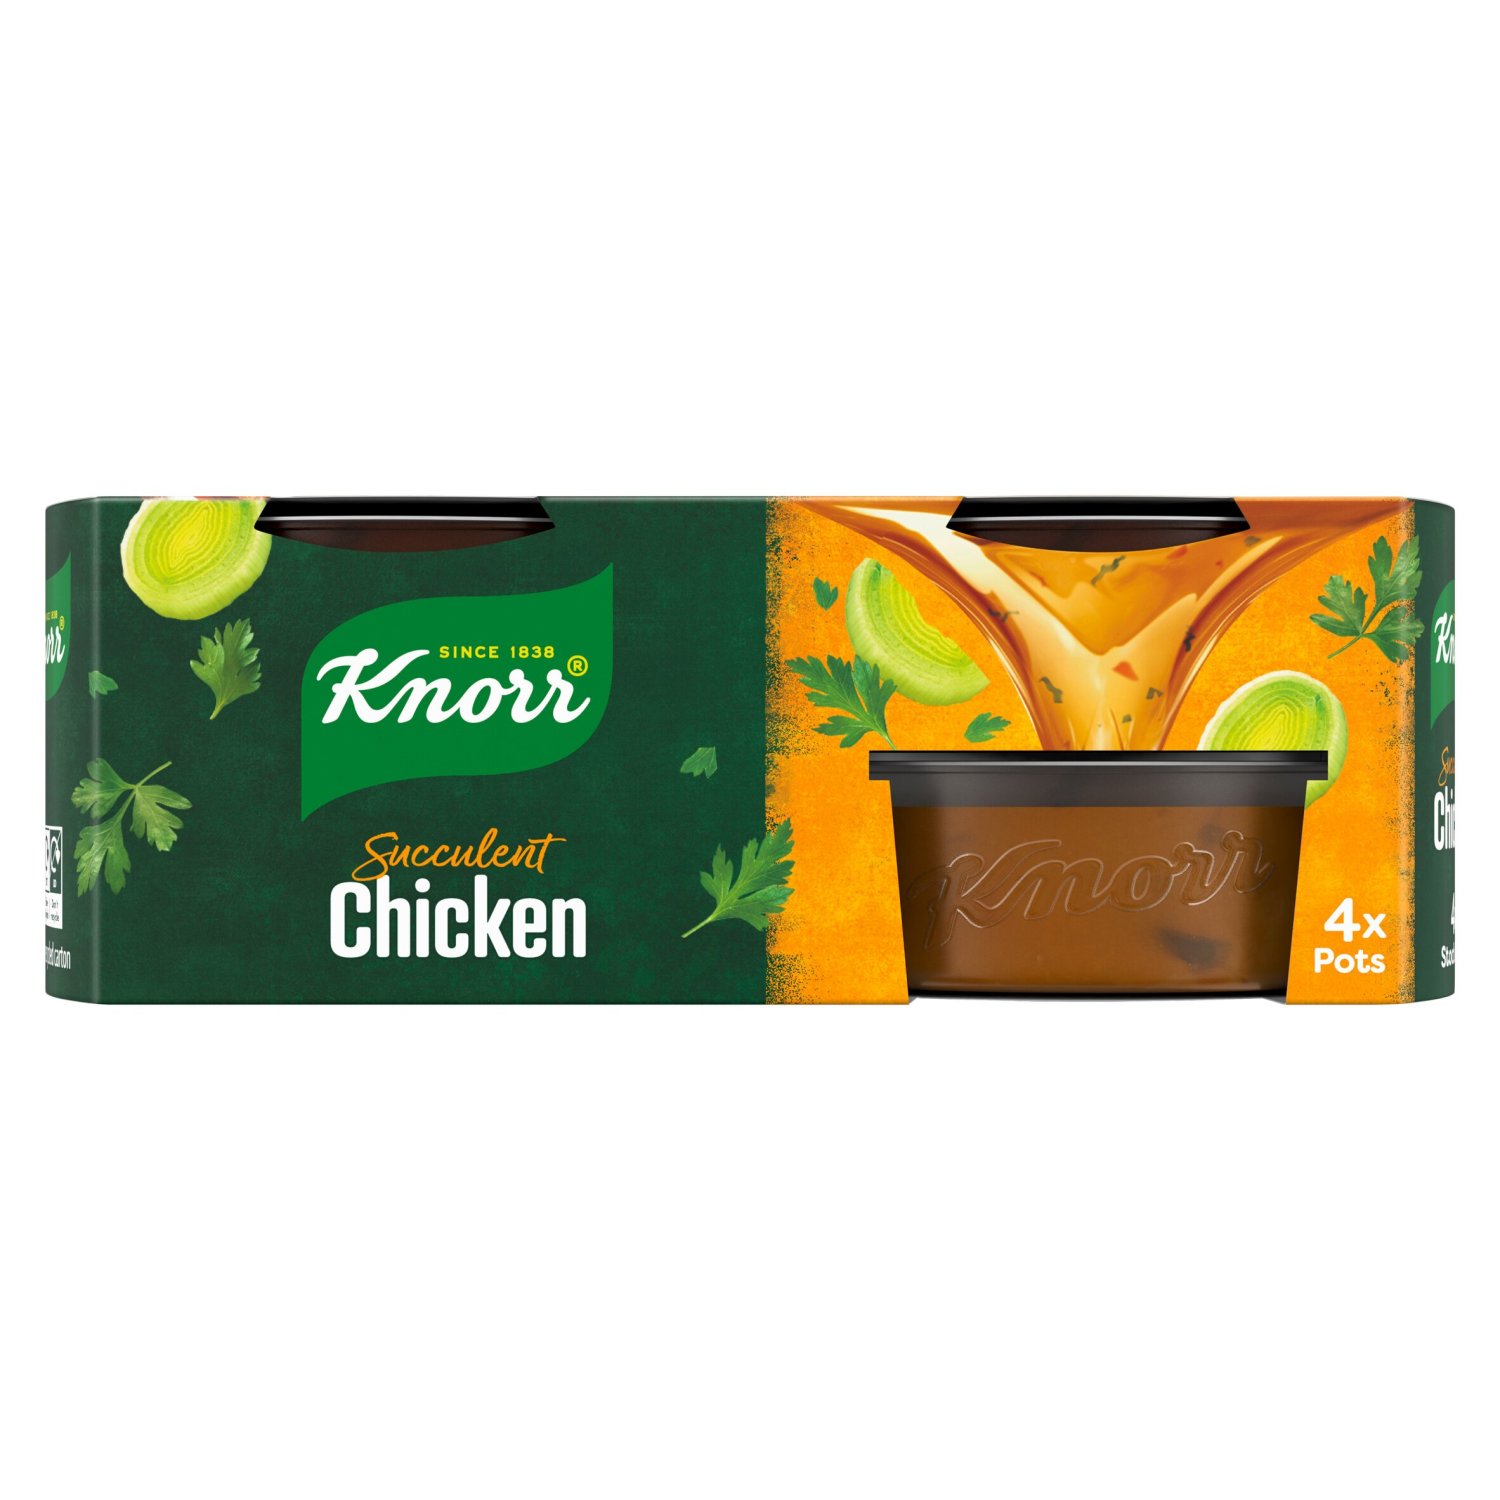 Knorr Chicken Stock Pot 4 Pack (28 g)